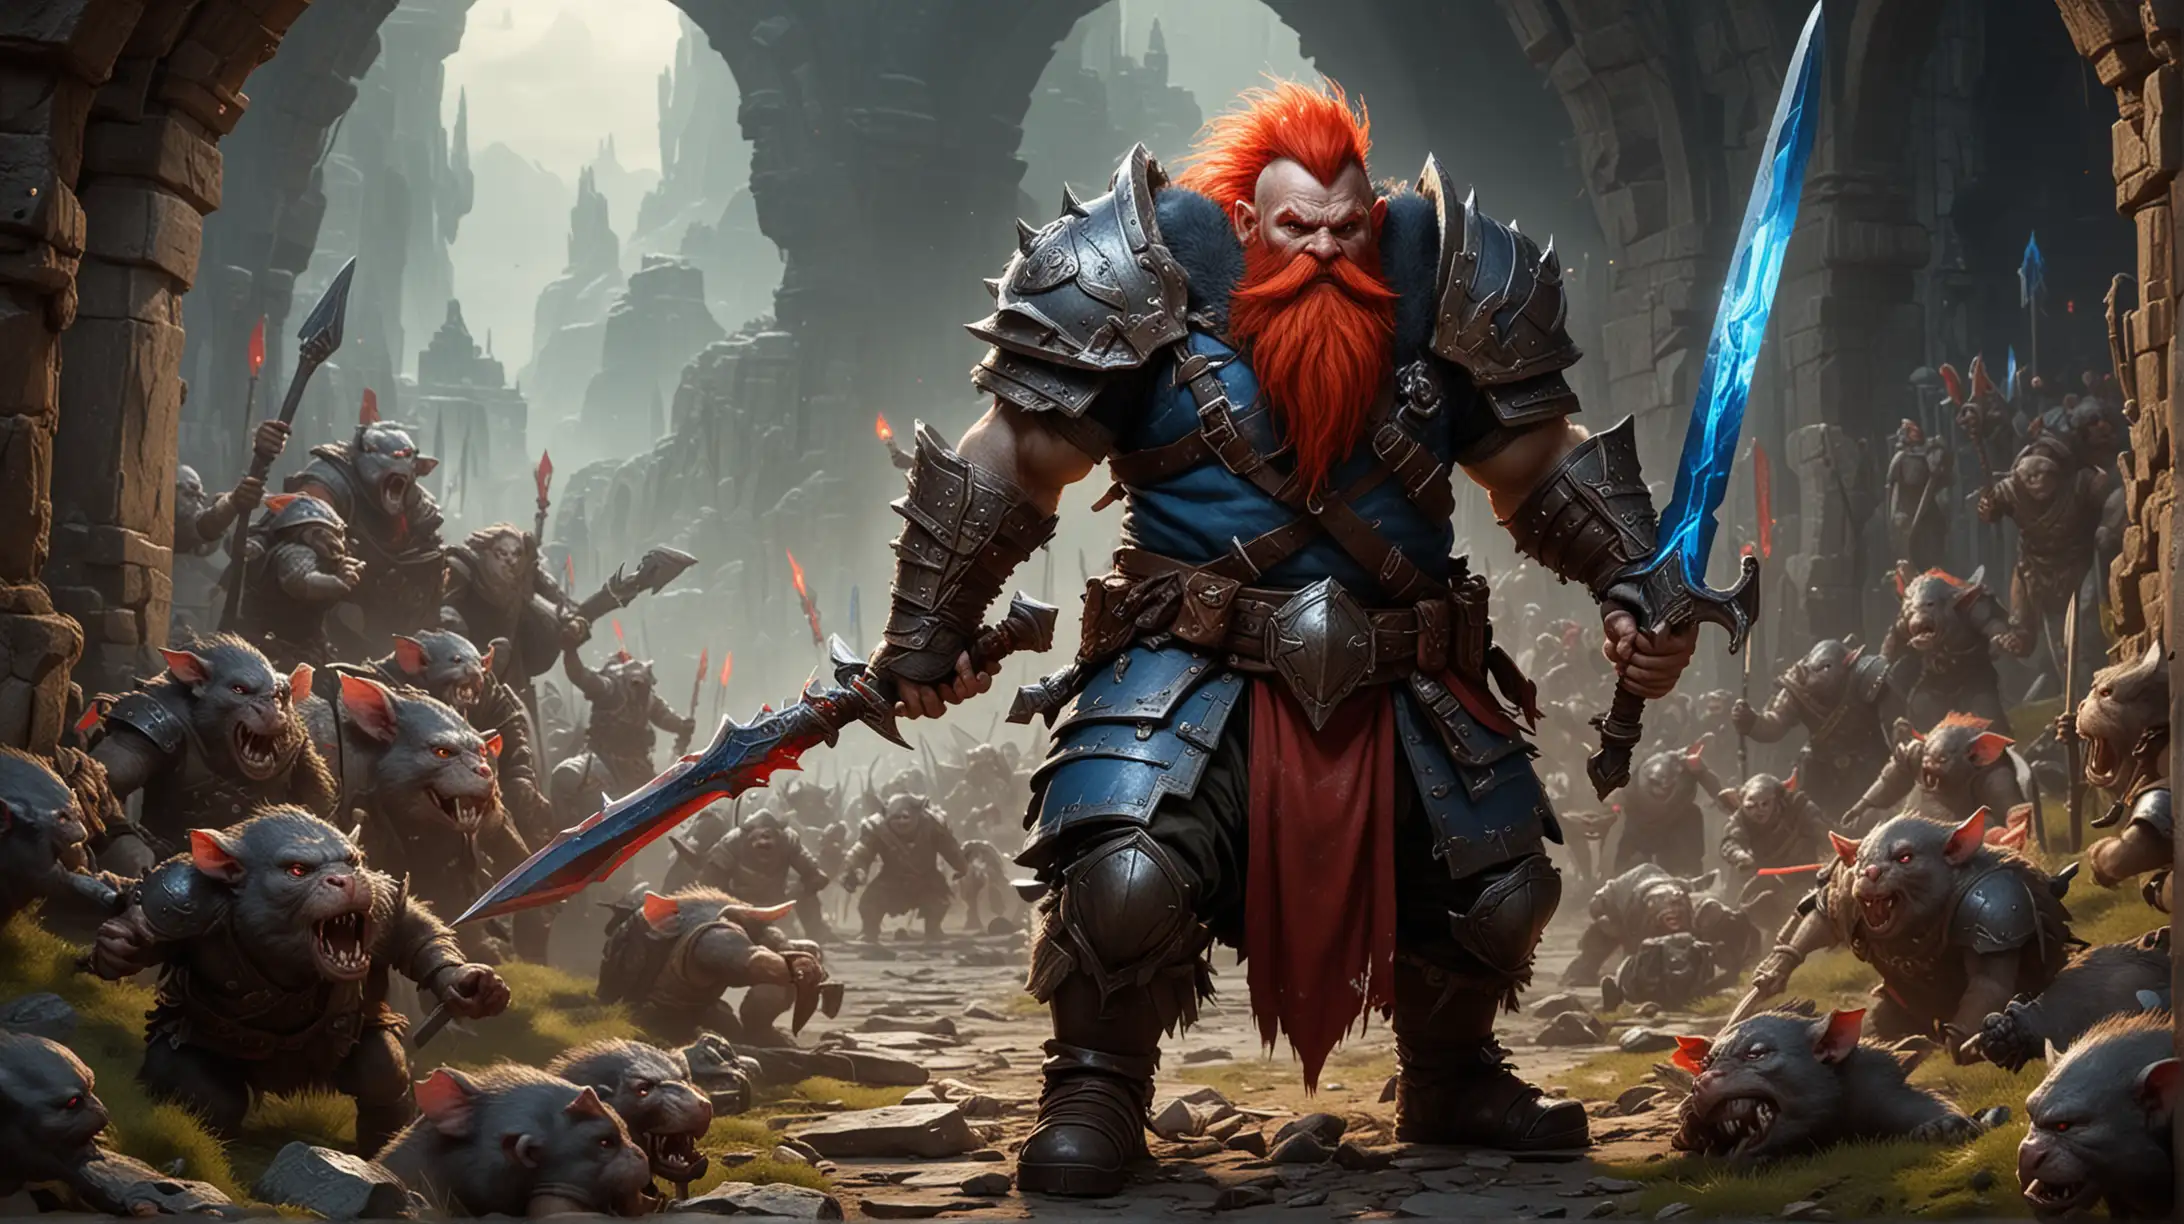 A stalwart Dwarven fighter faces away from the viewer. He stand off against 2 monstrous rat-ogres 4 times his size. He has a red mohawk. He carries a glowing blue sword and a large shield.